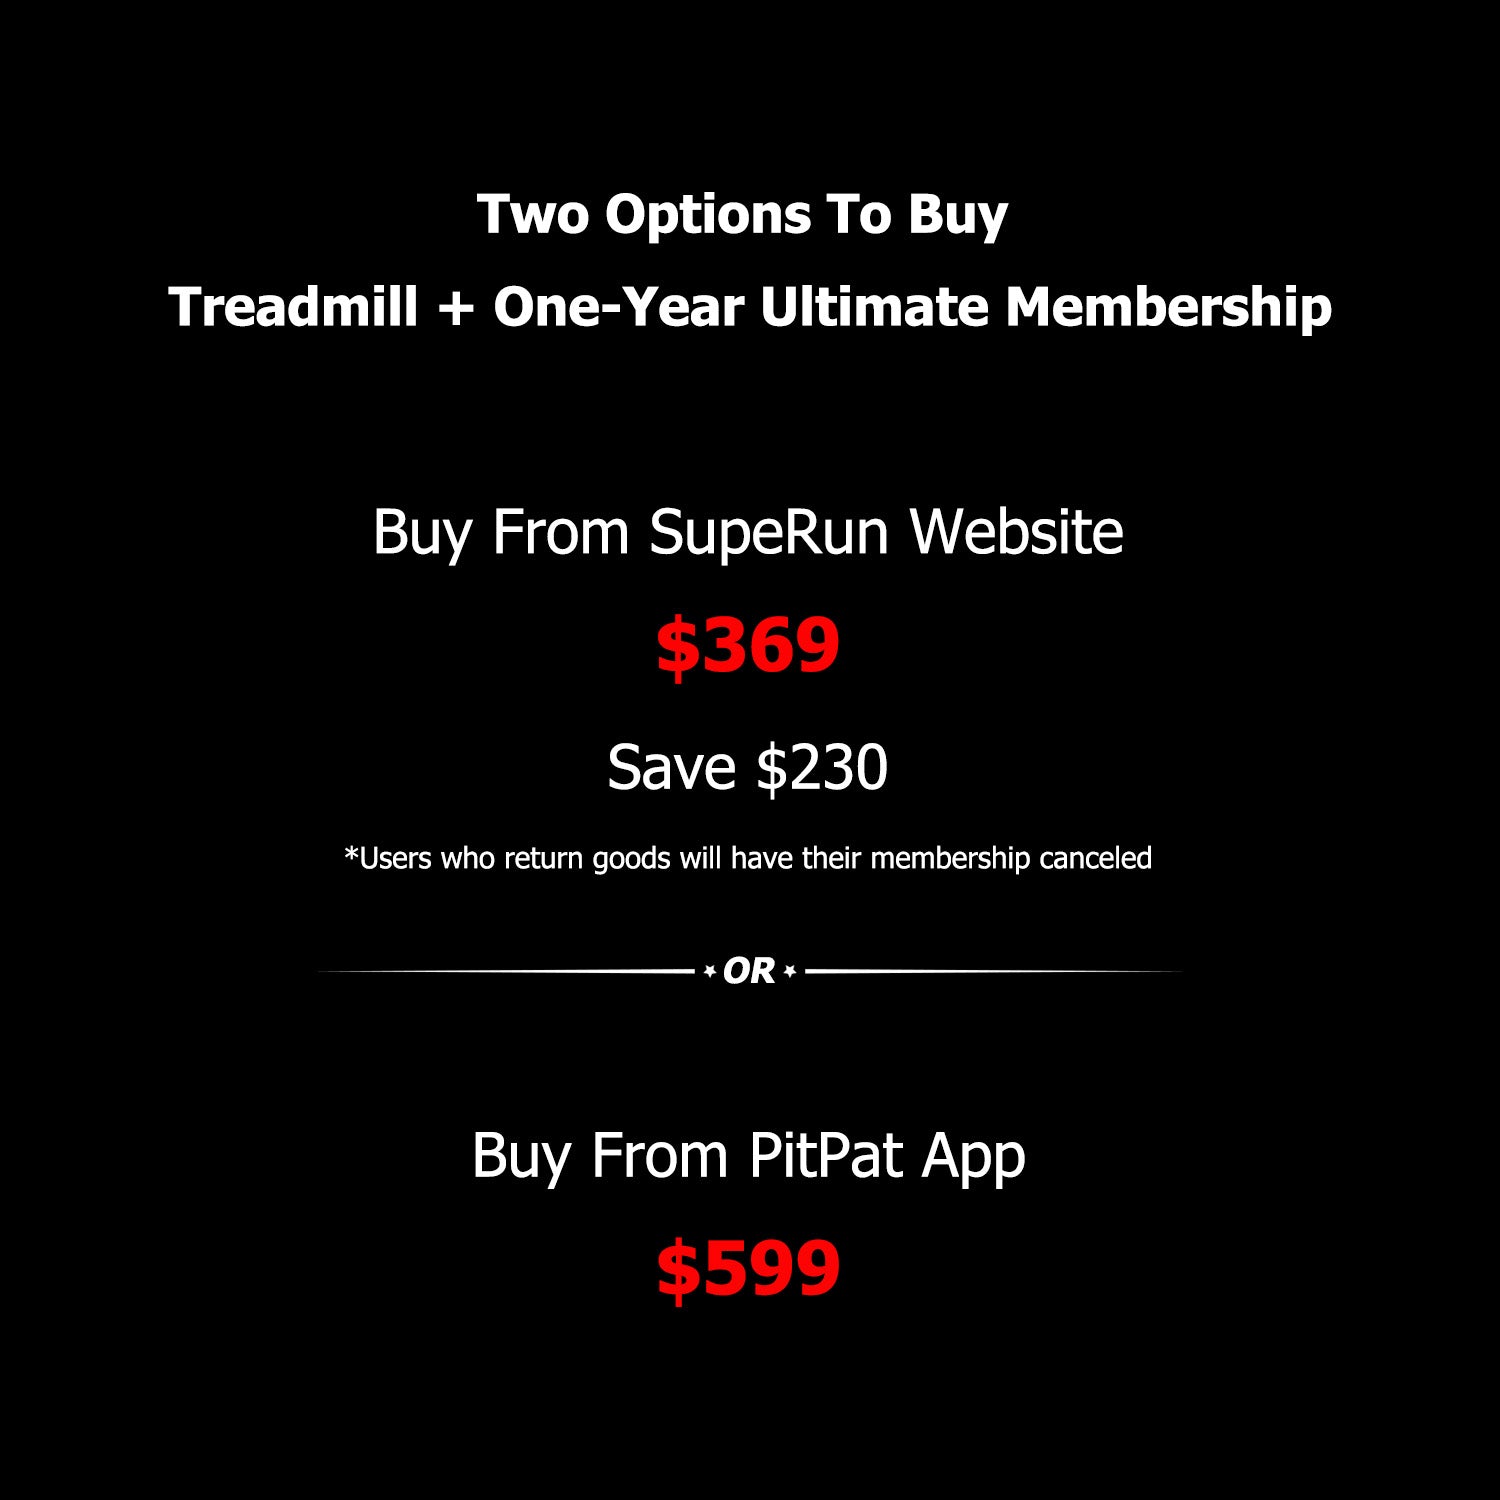 SupeRun AS02 Inclined Foldable Smart 10 MPH Online Racing Treadmill